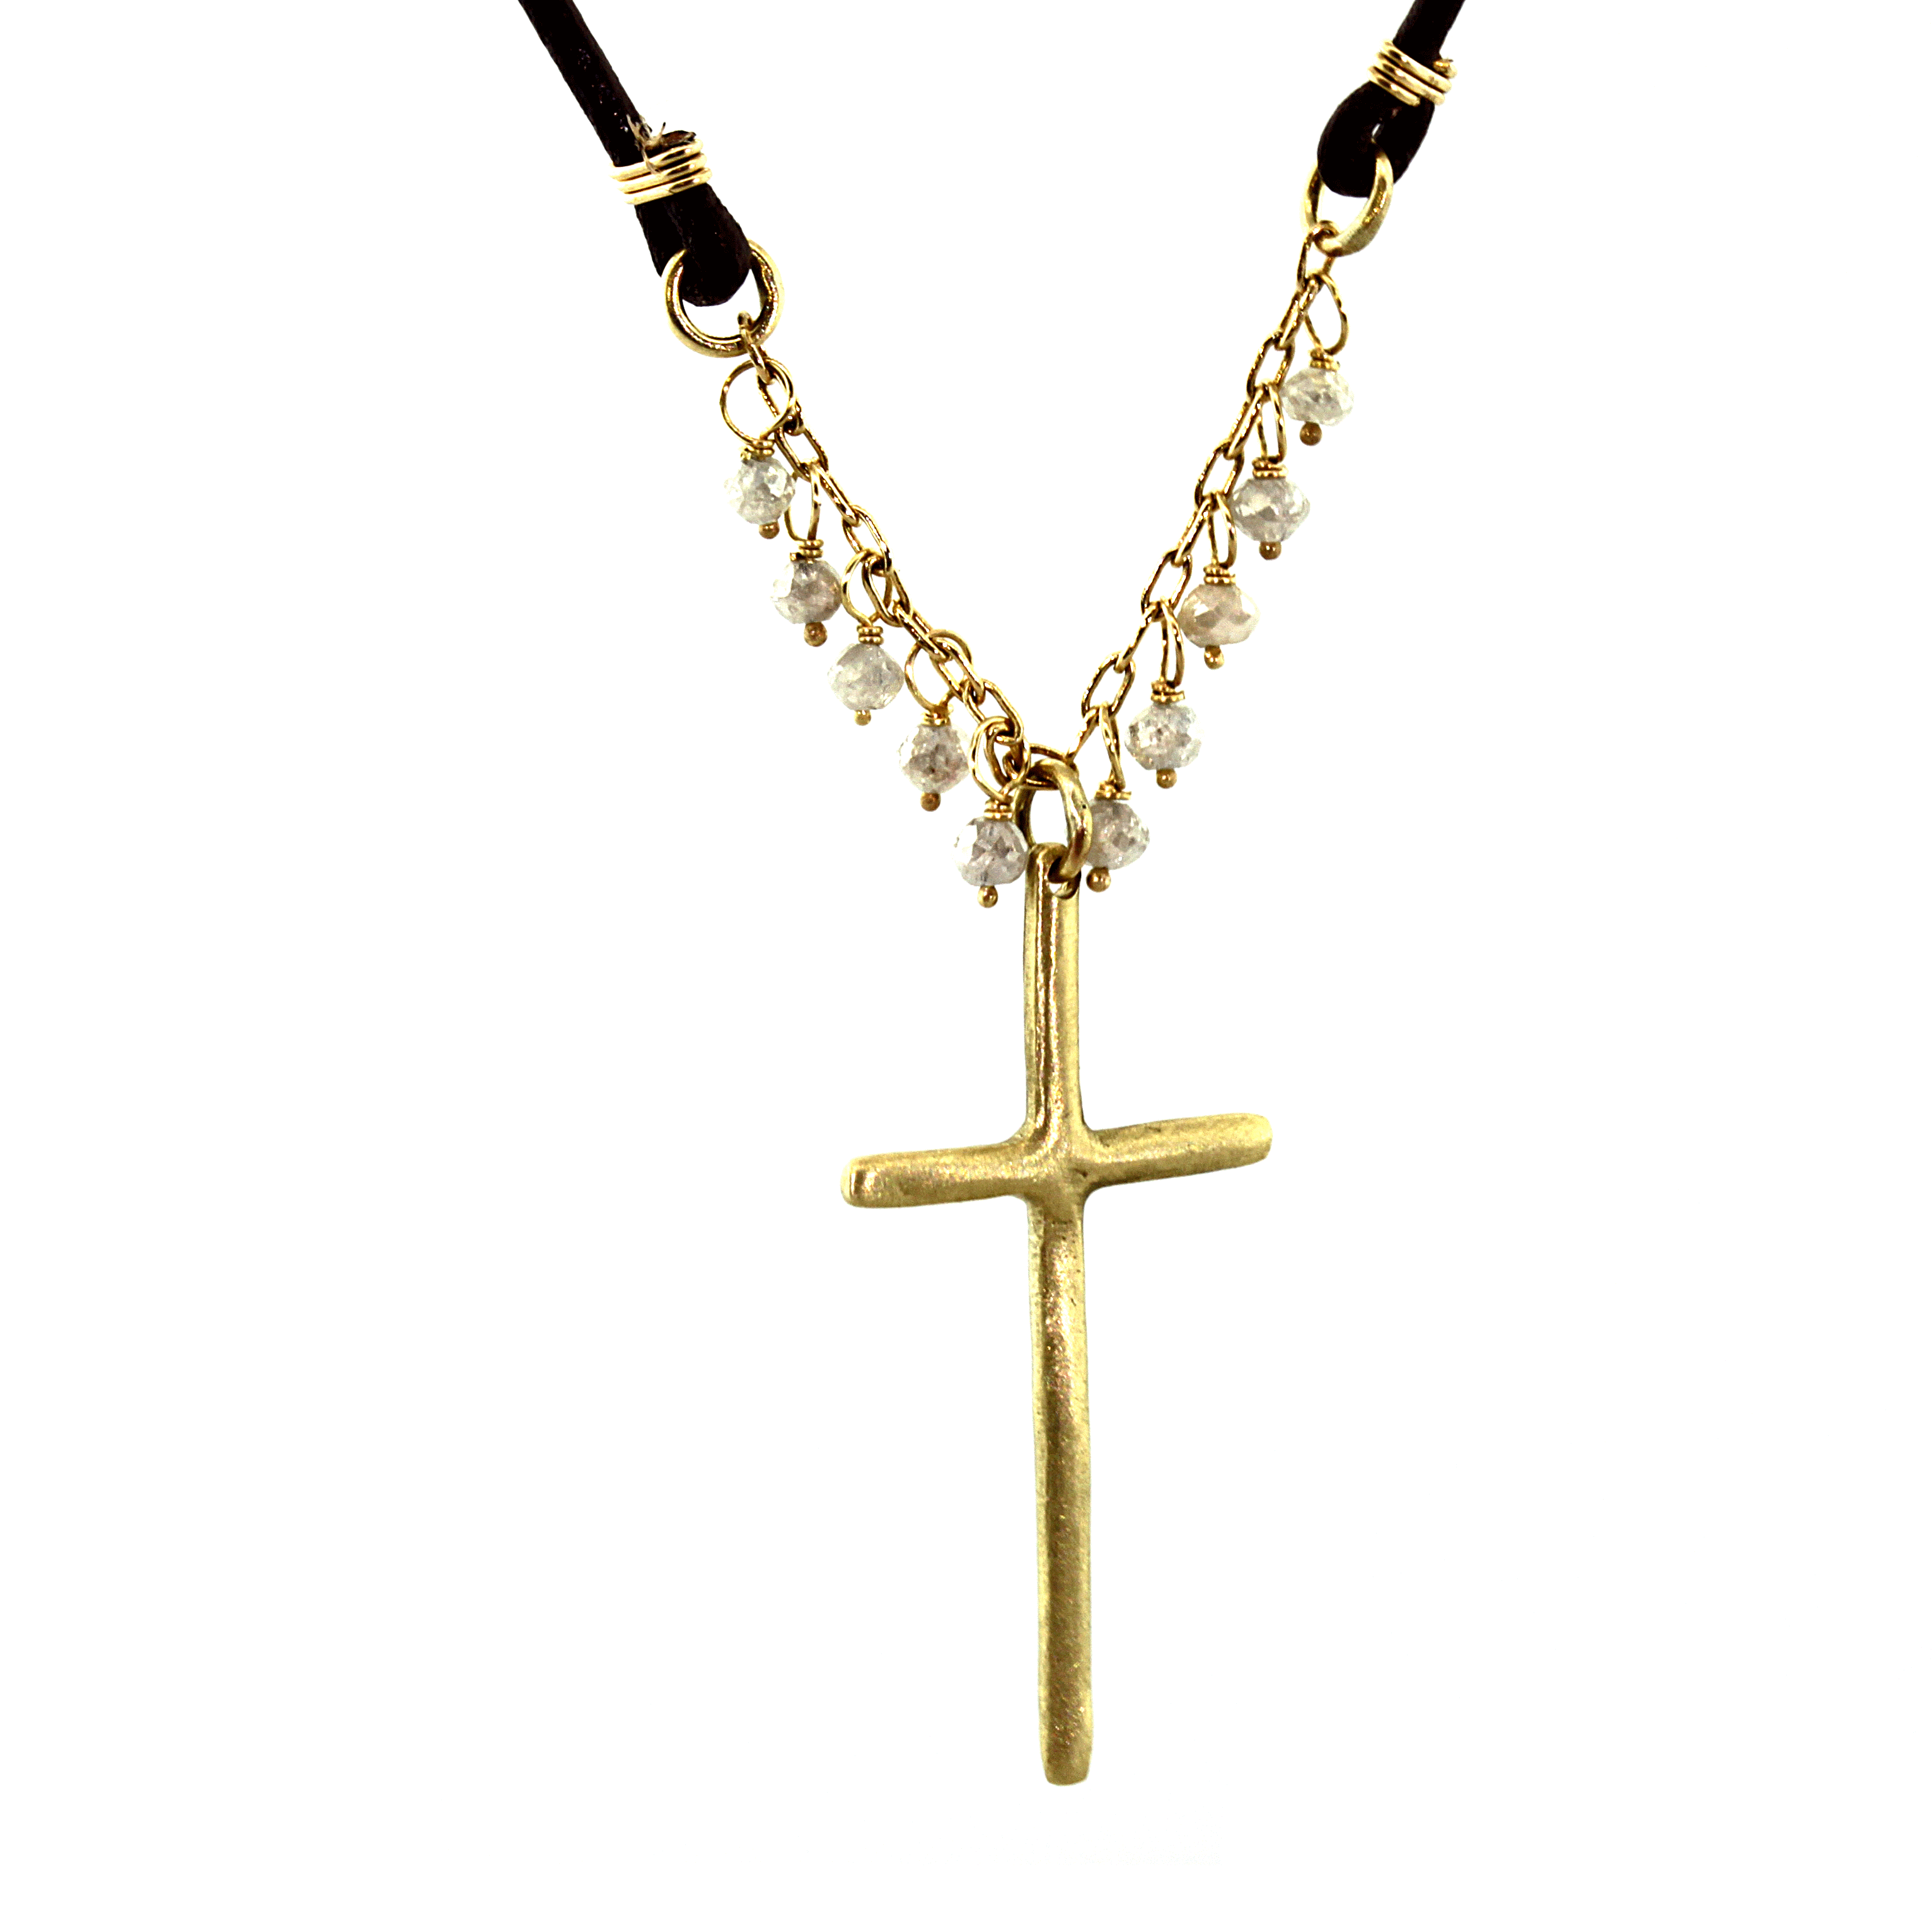 Bohemian Diamond and Gold Cross Necklace - Rebecca Lankford Bohemian Cross Necklace - Rebecca Lankford Designs